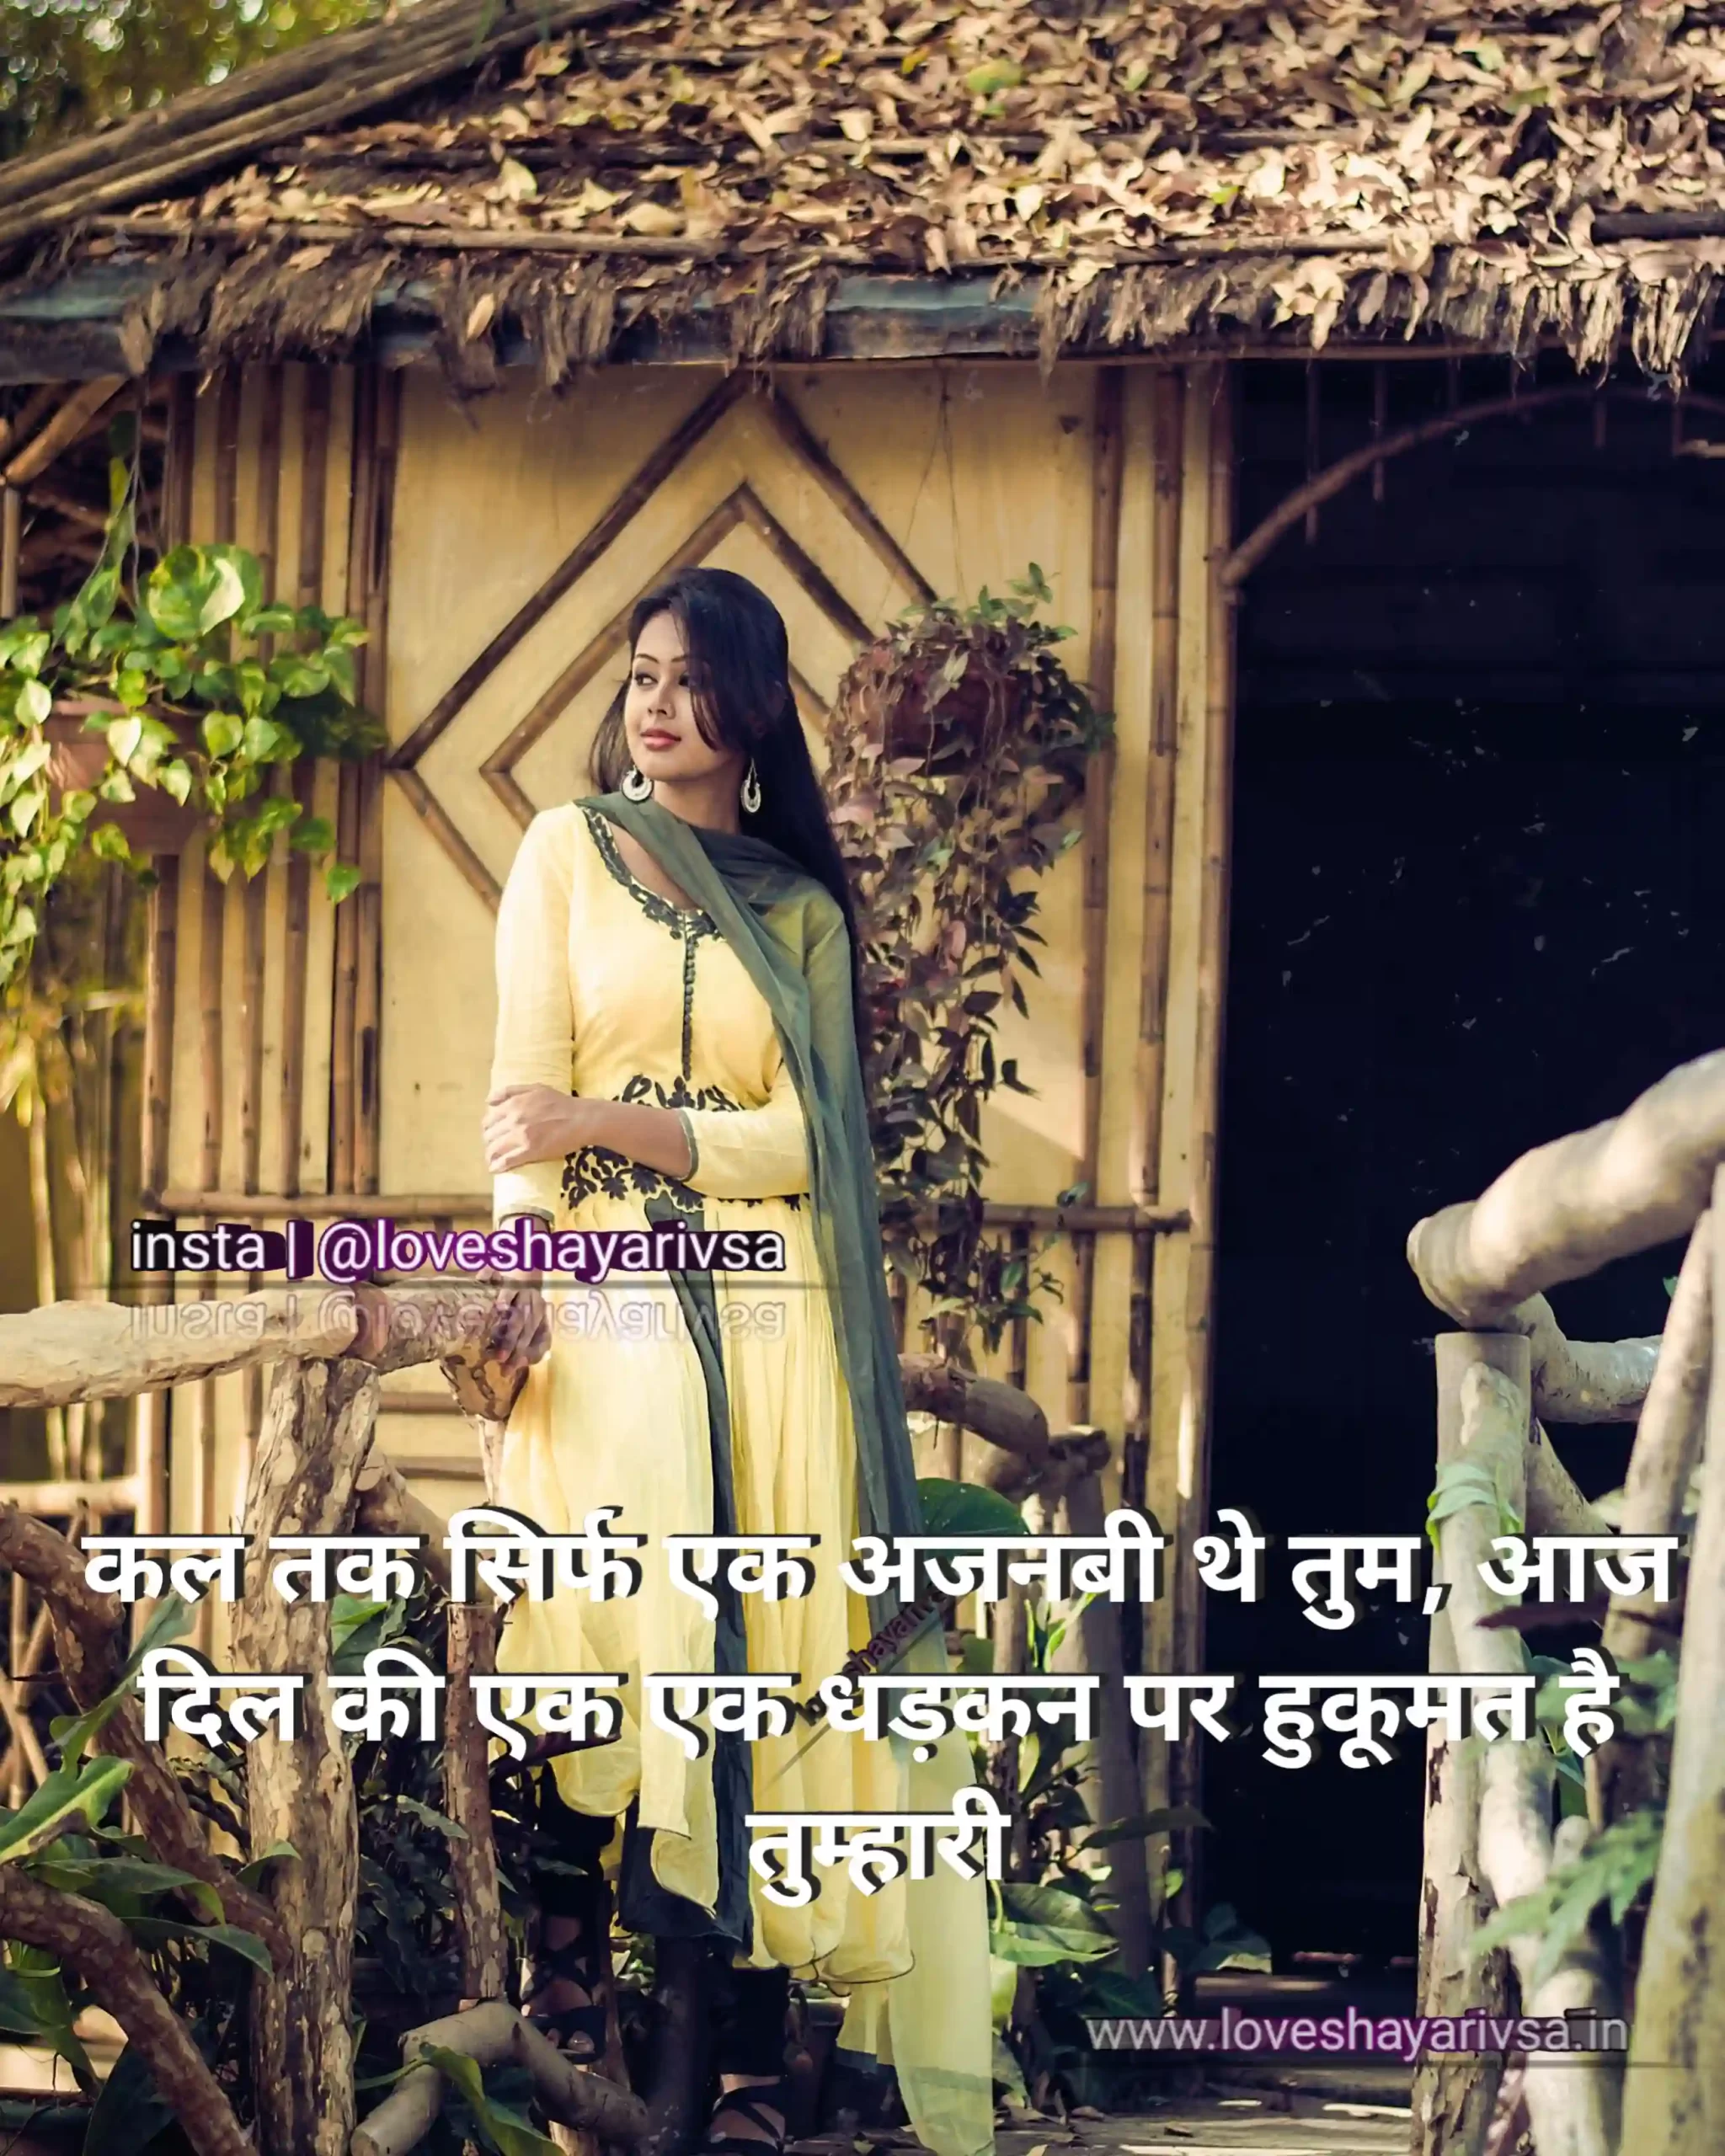 Romantic Shayari in Hindi with a person standing on the railing in front of a building